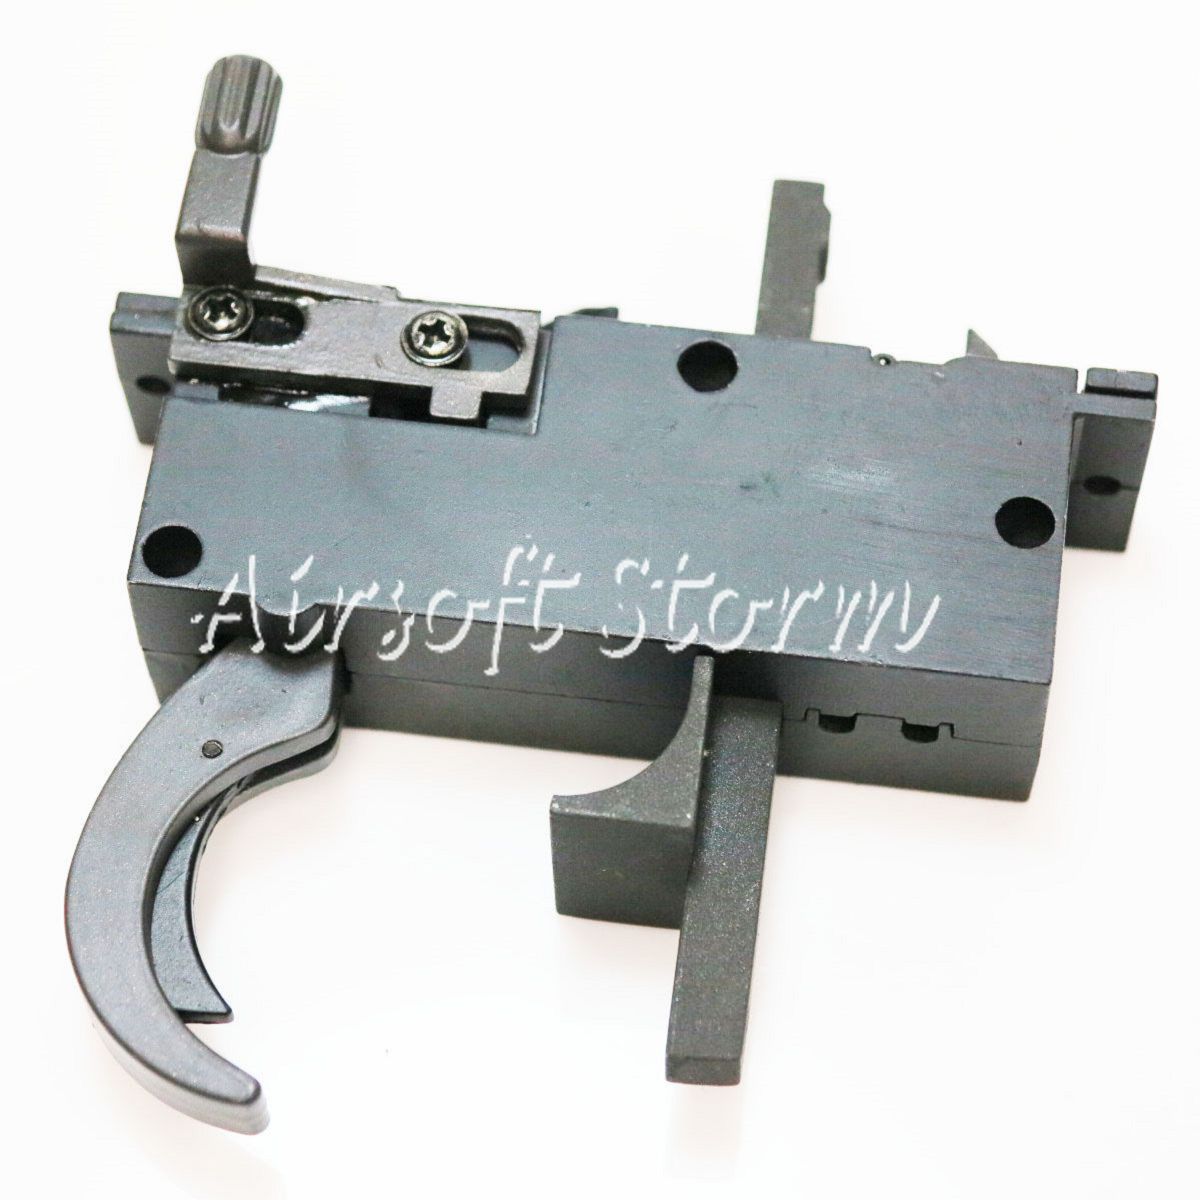 AEG Gear WELL MB01 Metal Trigger Assembly for L96 Type Airsoft Sniper